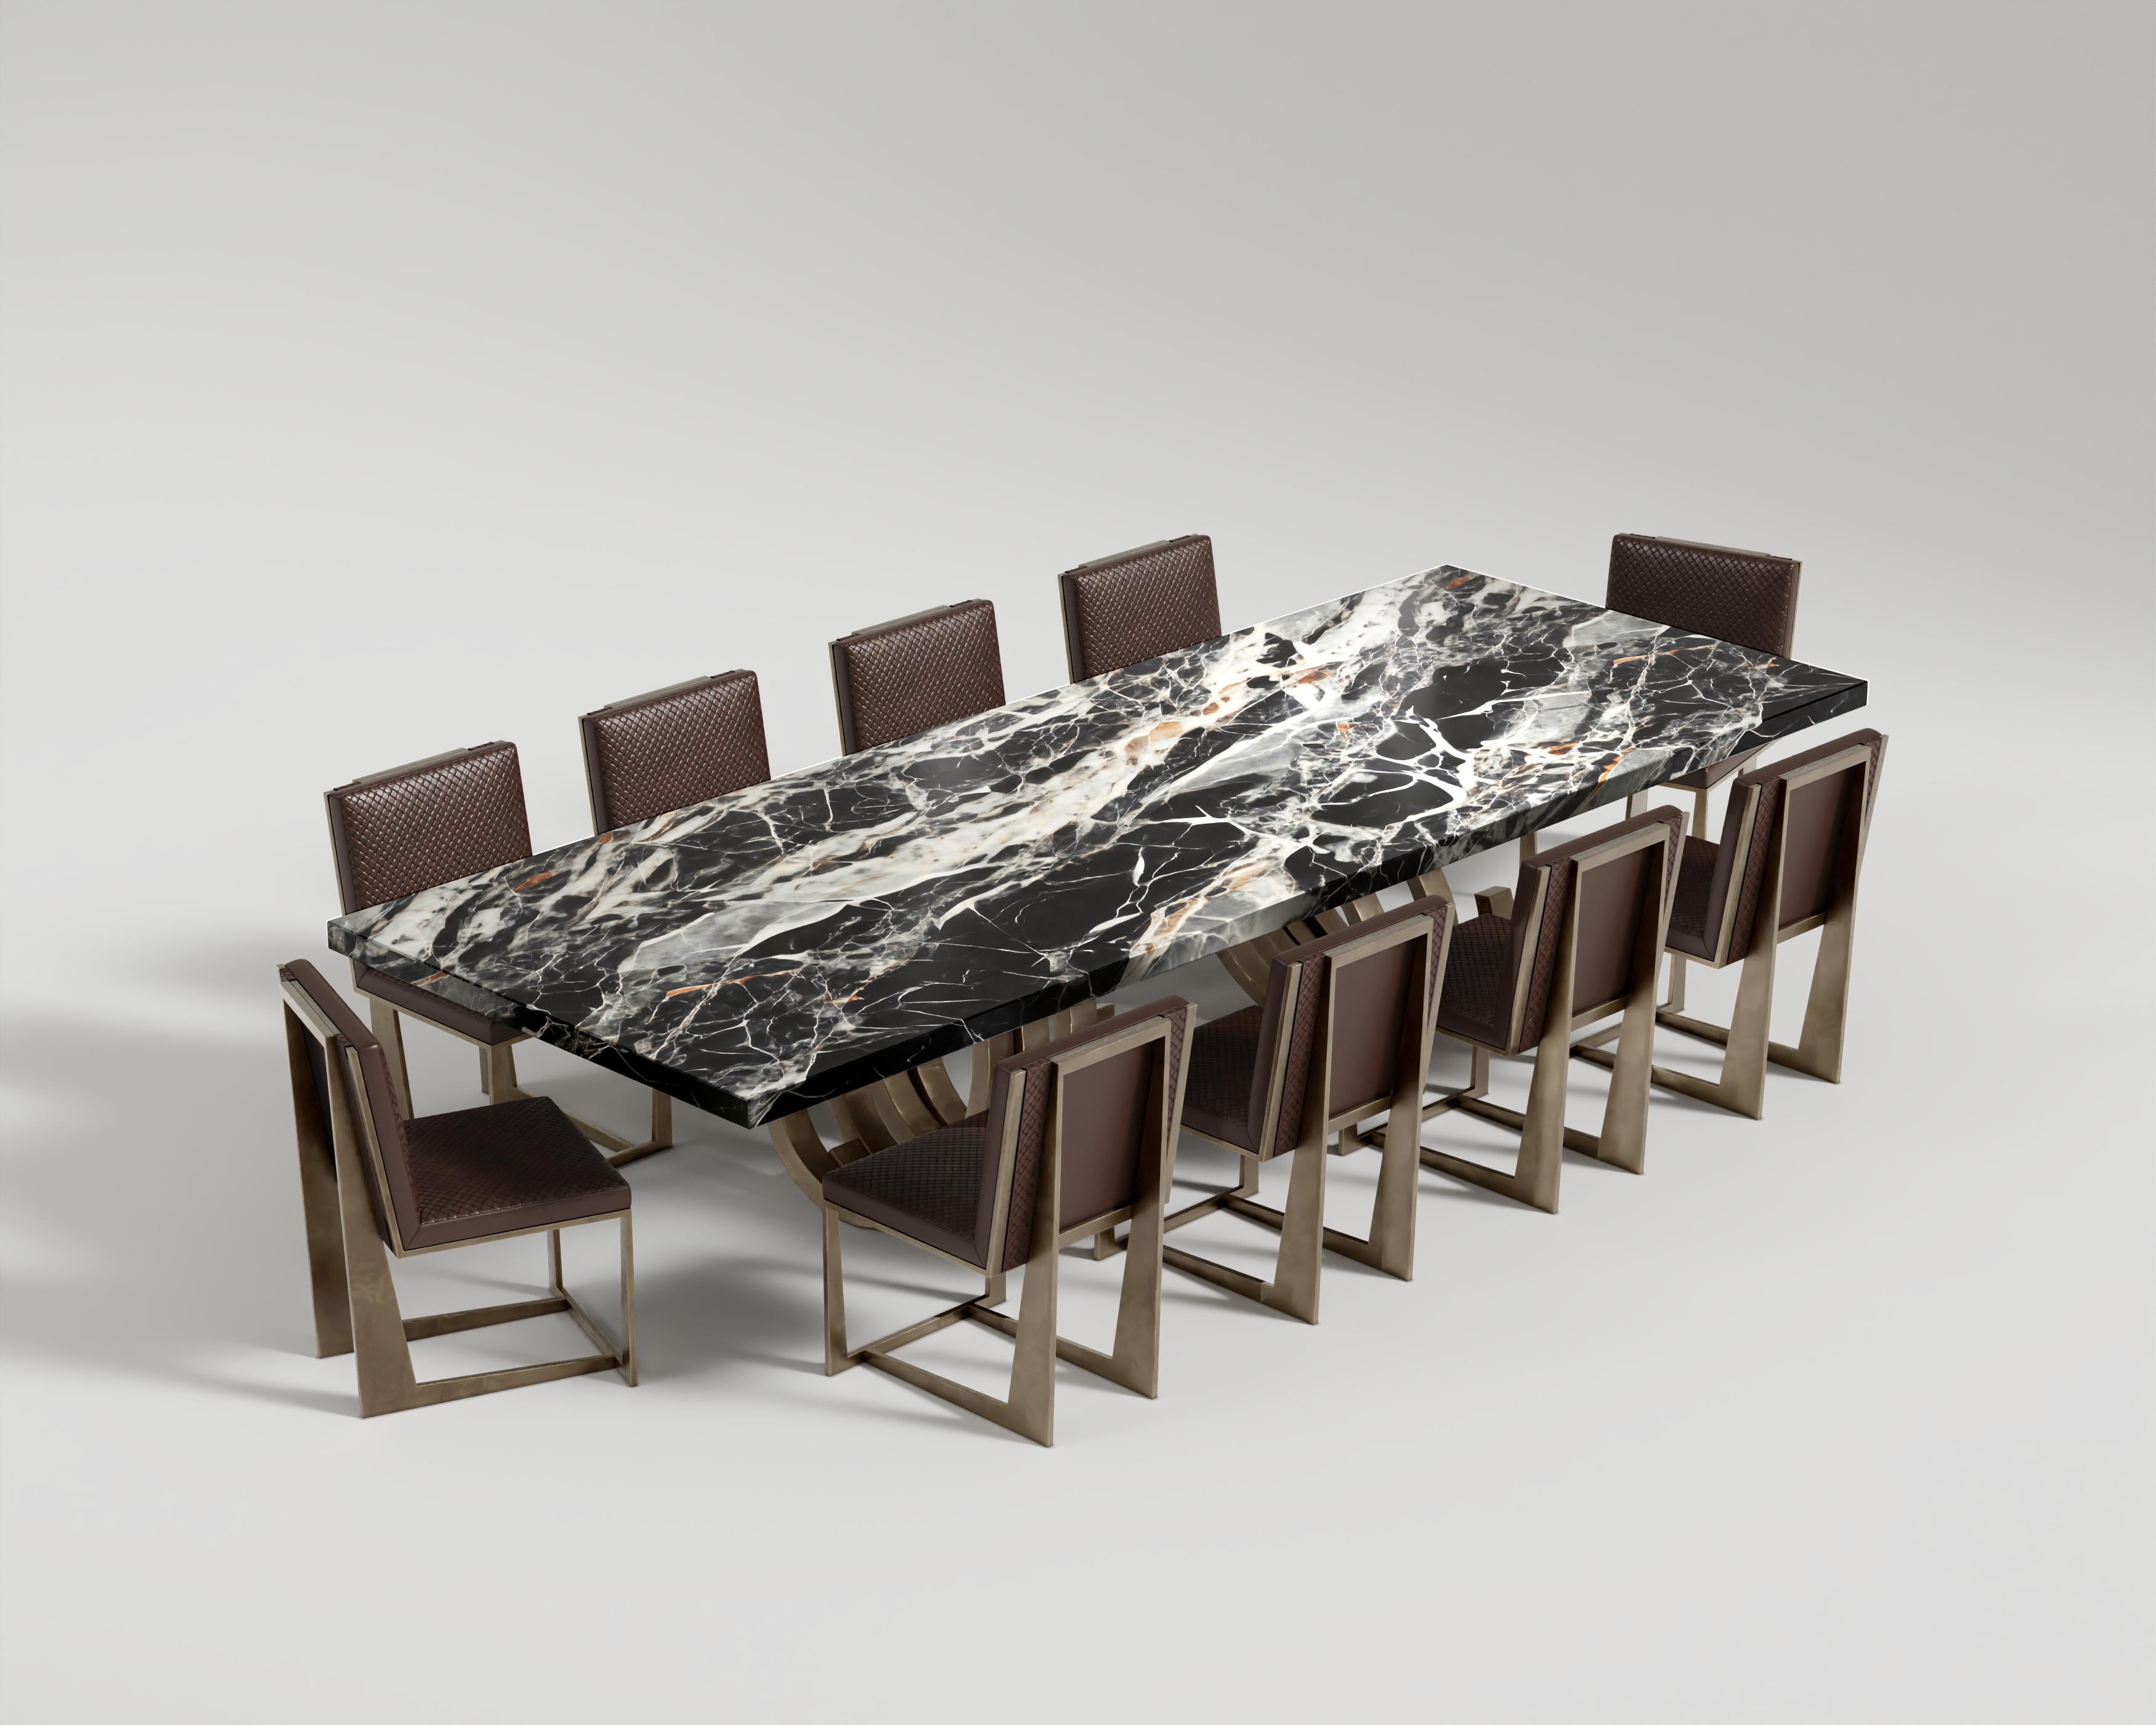 Oculus Dining Table Patina Bronze
The Oculus Dining Table stands as a testament to artisanal craftsmanship and opulent design. Its centerpiece is a one-of-a-kind marble slab tabletop, distinguished by its uniquely patterned and textured surface,